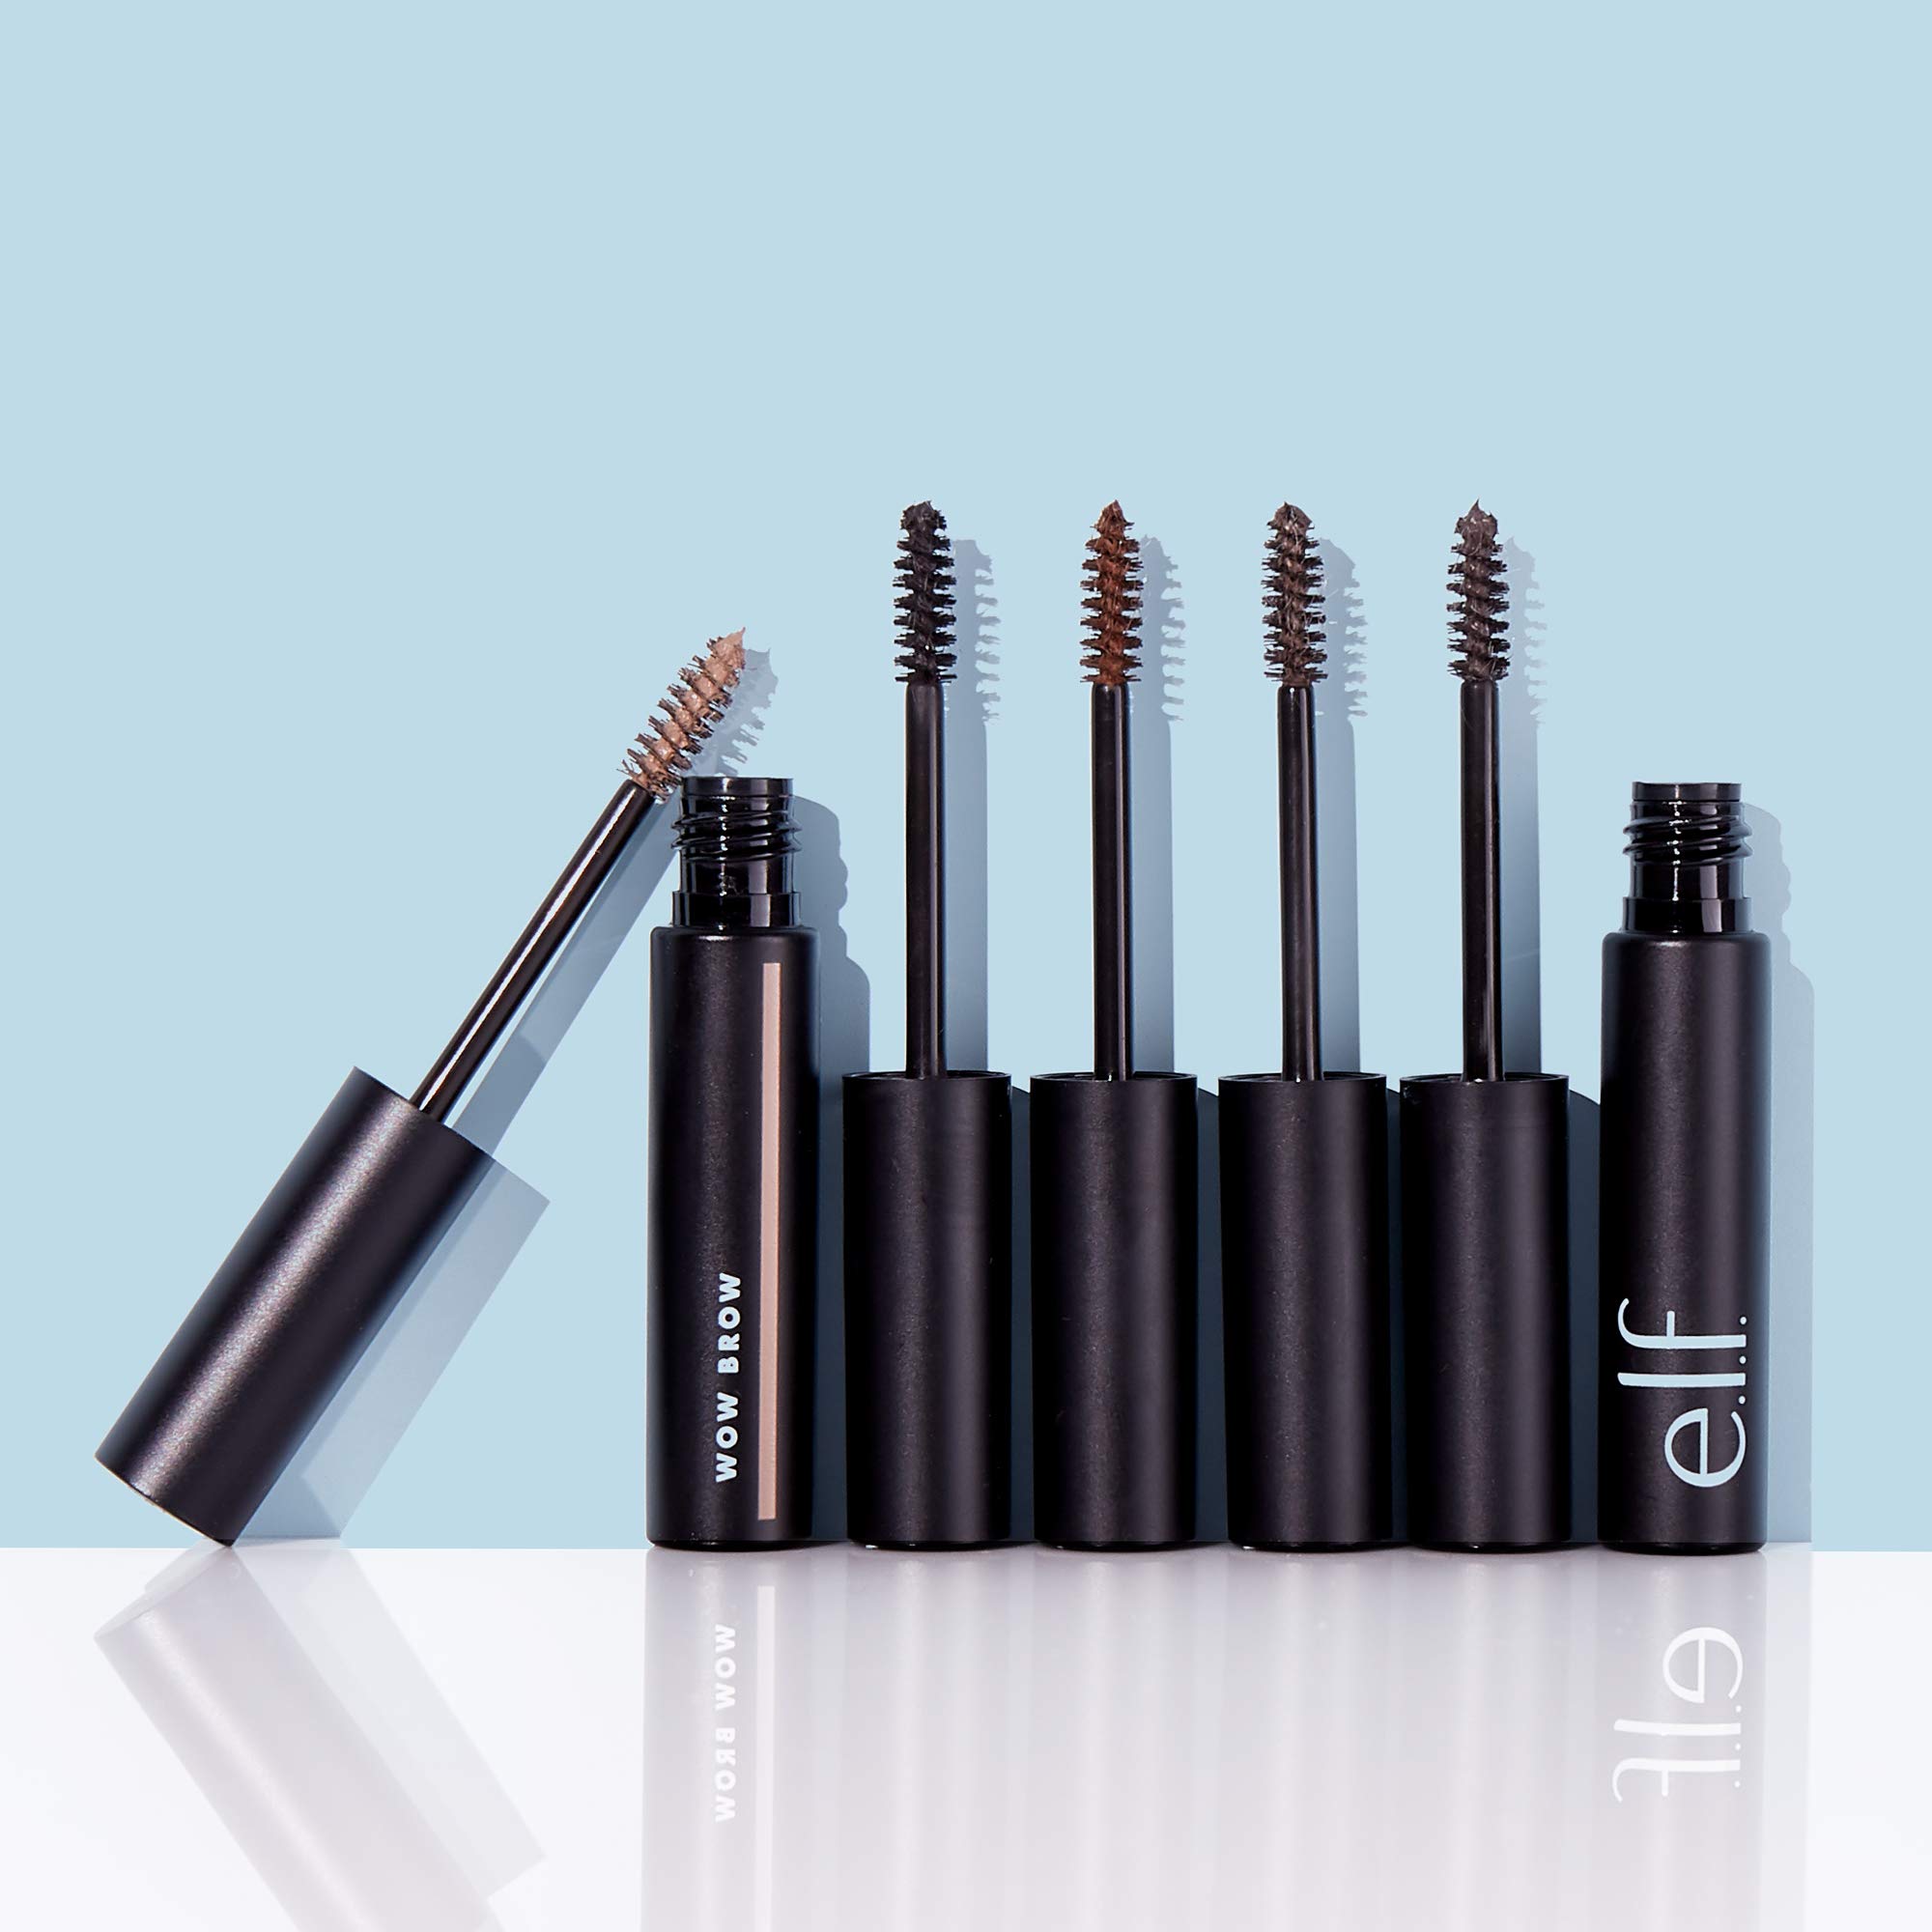 e.l.f., Wow Brow Gel, Volumizing, Buildable, Wax-Gel Hybrid, Creates Full, Voluminous-Looking Brows, Locks Brow Hairs In Place, Neutral Brown, Fiber-Infused, 0.12 Oz